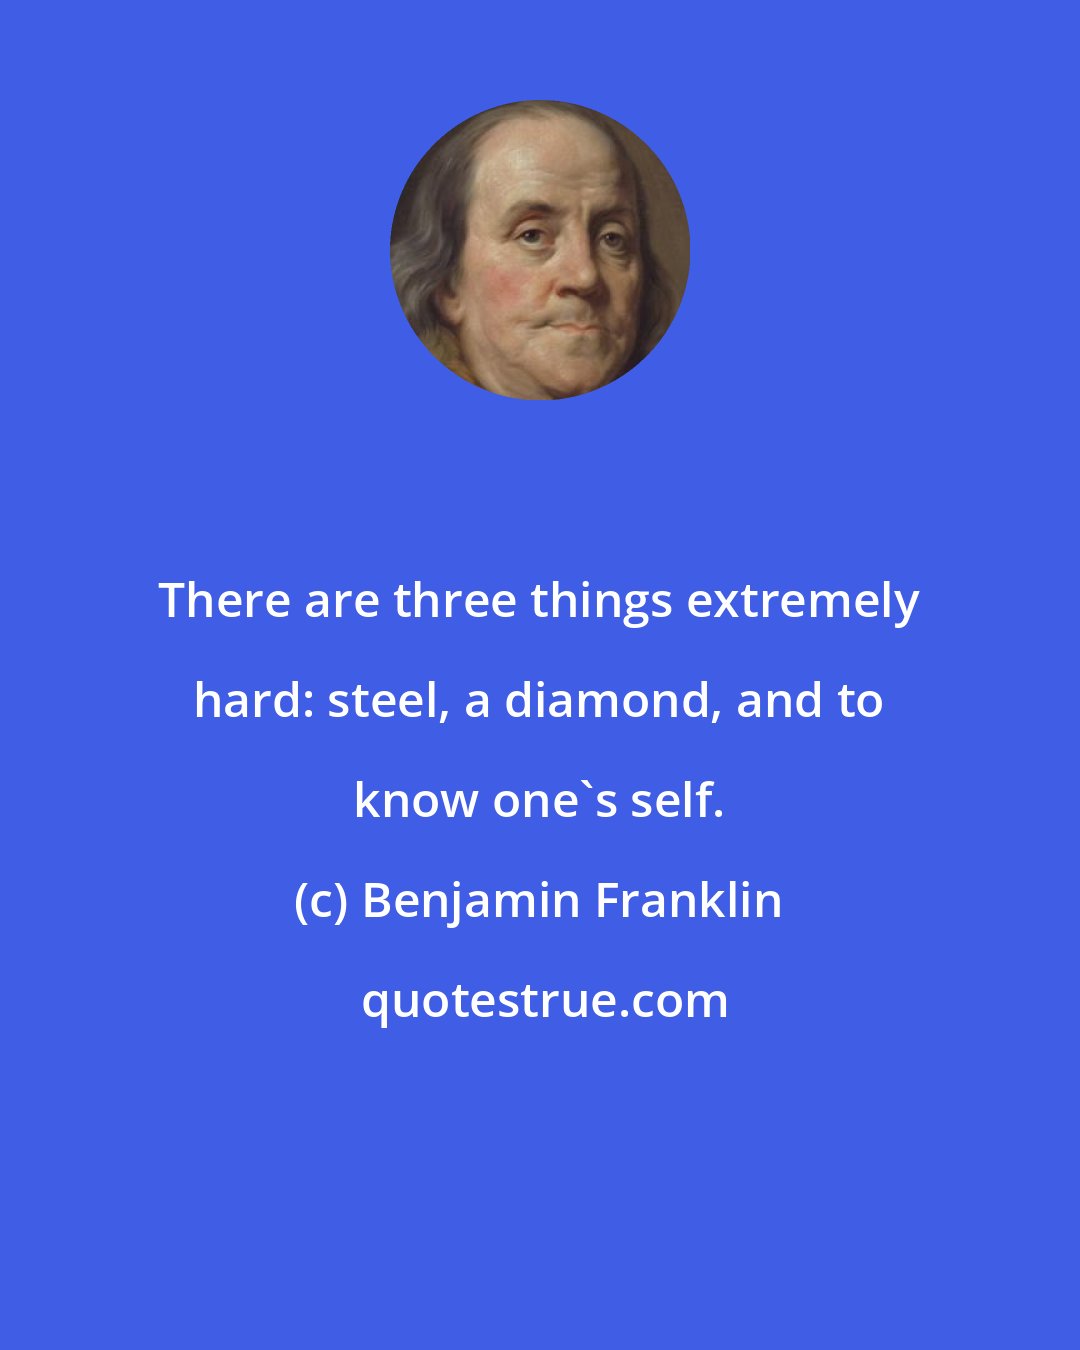 Benjamin Franklin: There are three things extremely hard: steel, a diamond, and to know one's self.